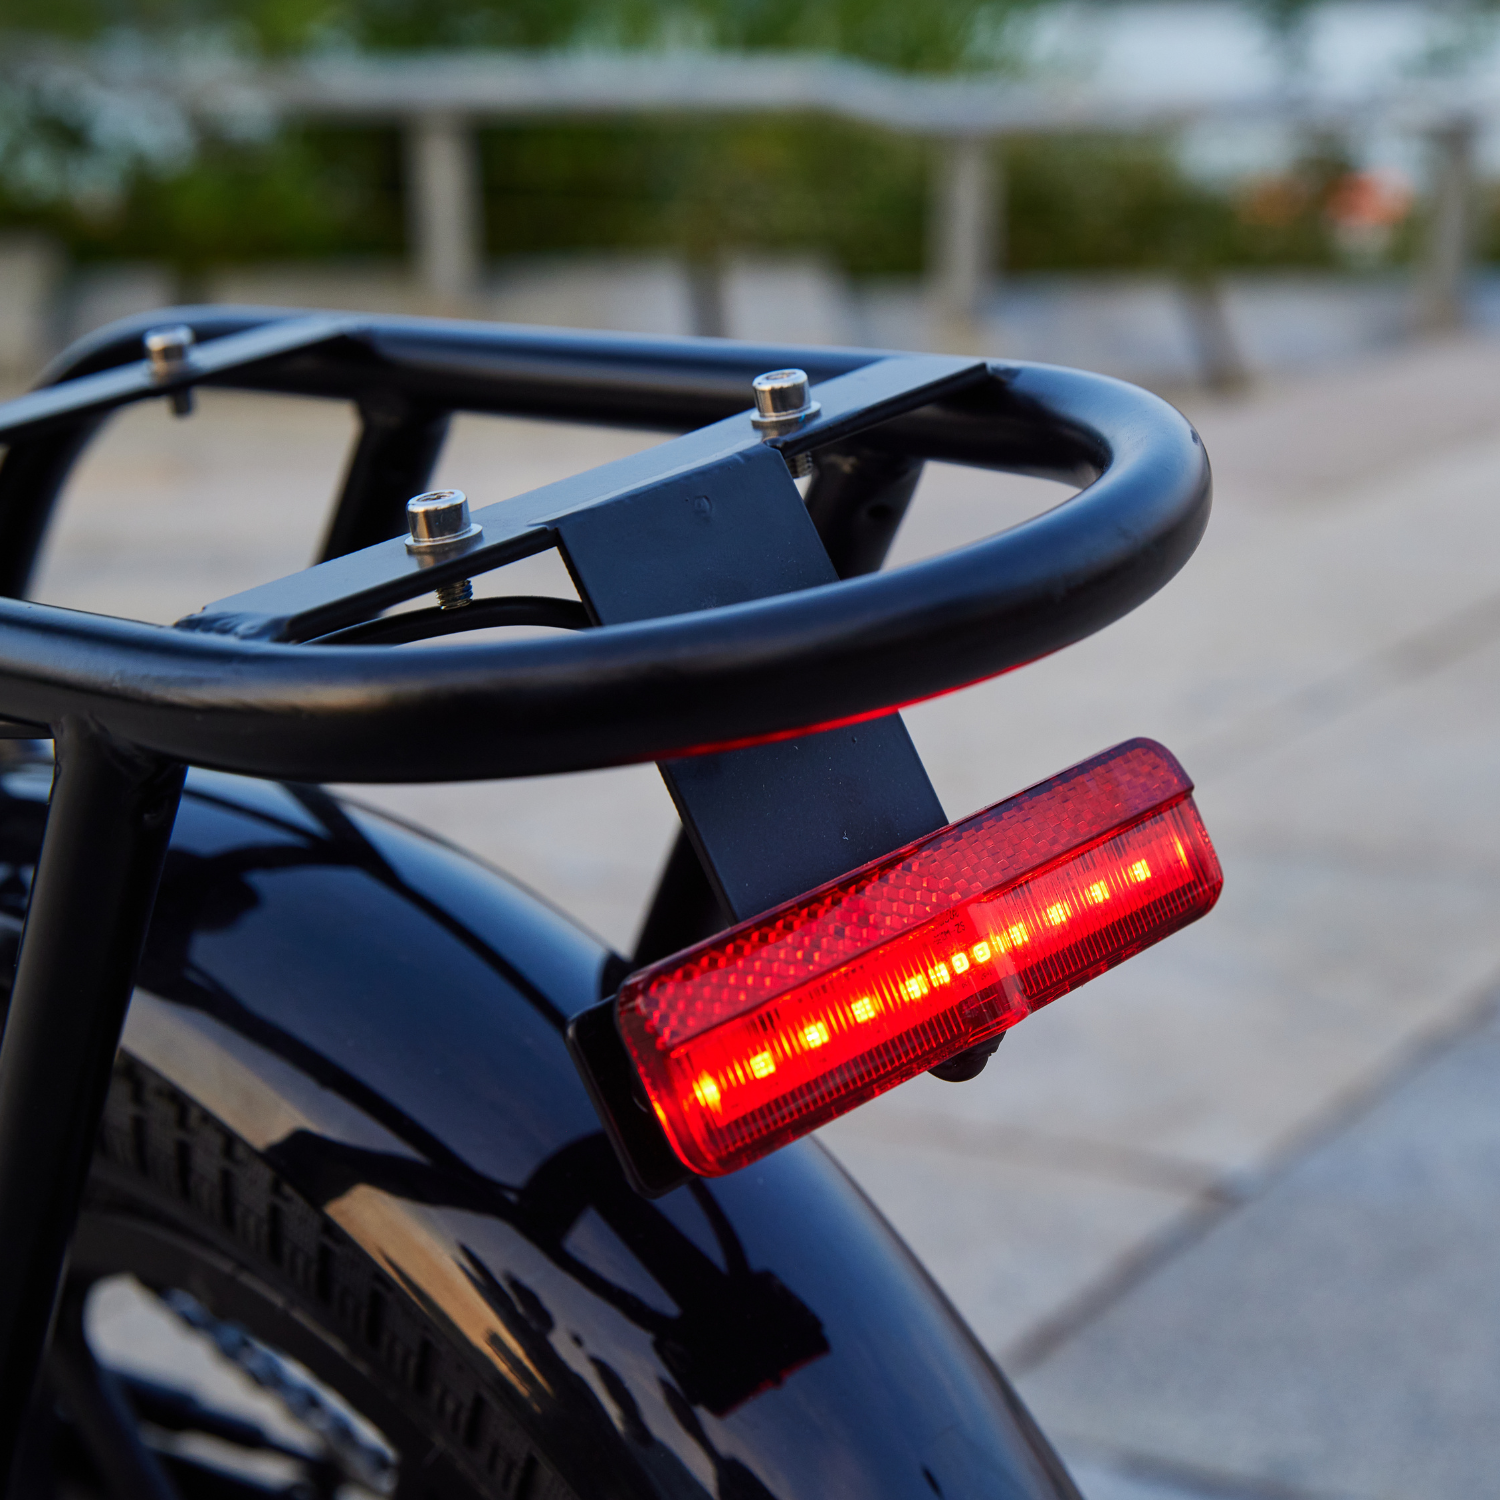 Red Tail Light on Back of Black Hoverfly H3 E-Bike, Showcasing Quality Craftsmanship & Boosting Safety.